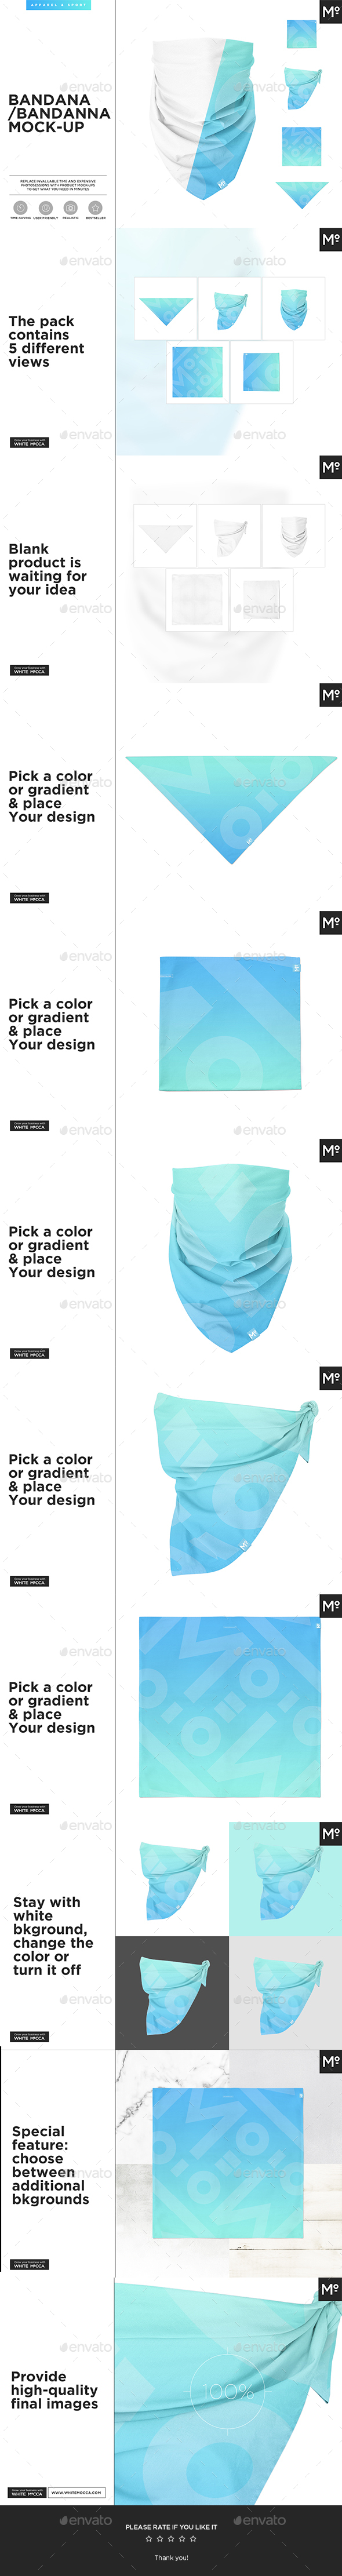 Download The Bandana Mock-up by Mocca2Go | GraphicRiver